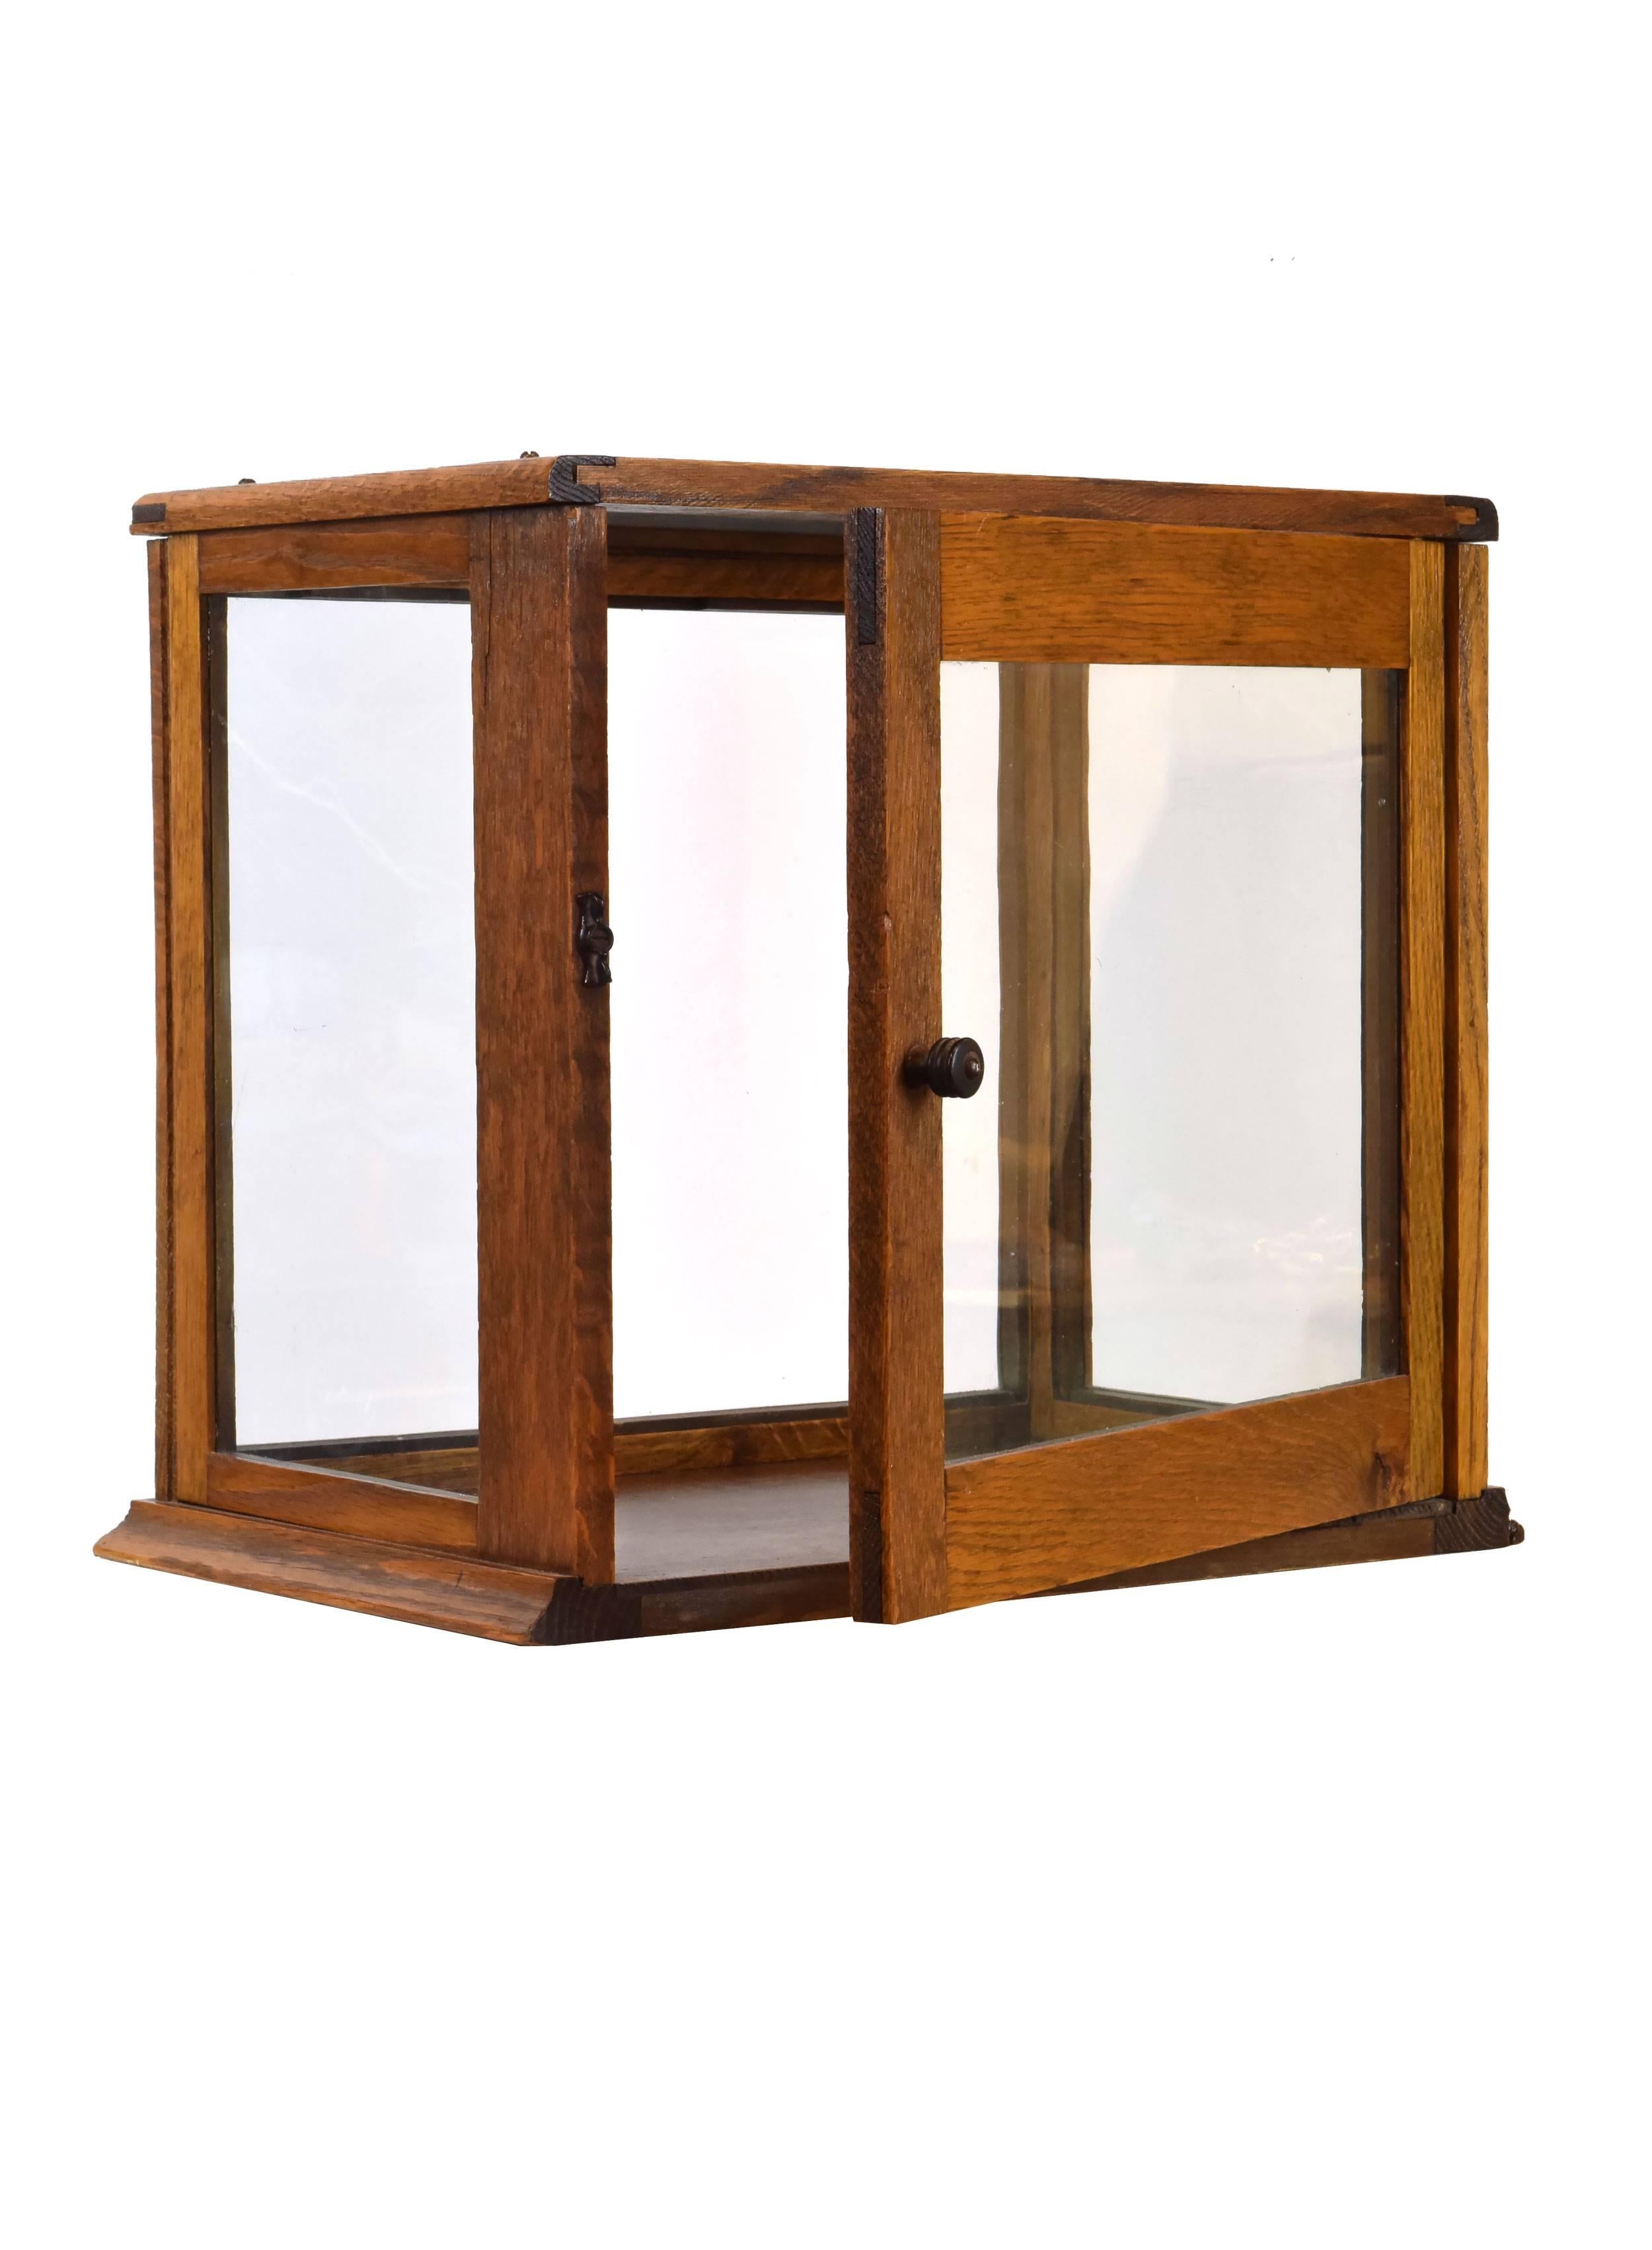 The rich, warm oak of this display box will beautifully complement any number of artifacts you may wish to display inside. Five glass panels offer many viewing angles, and a latch on the back allows you to open the box with ease.